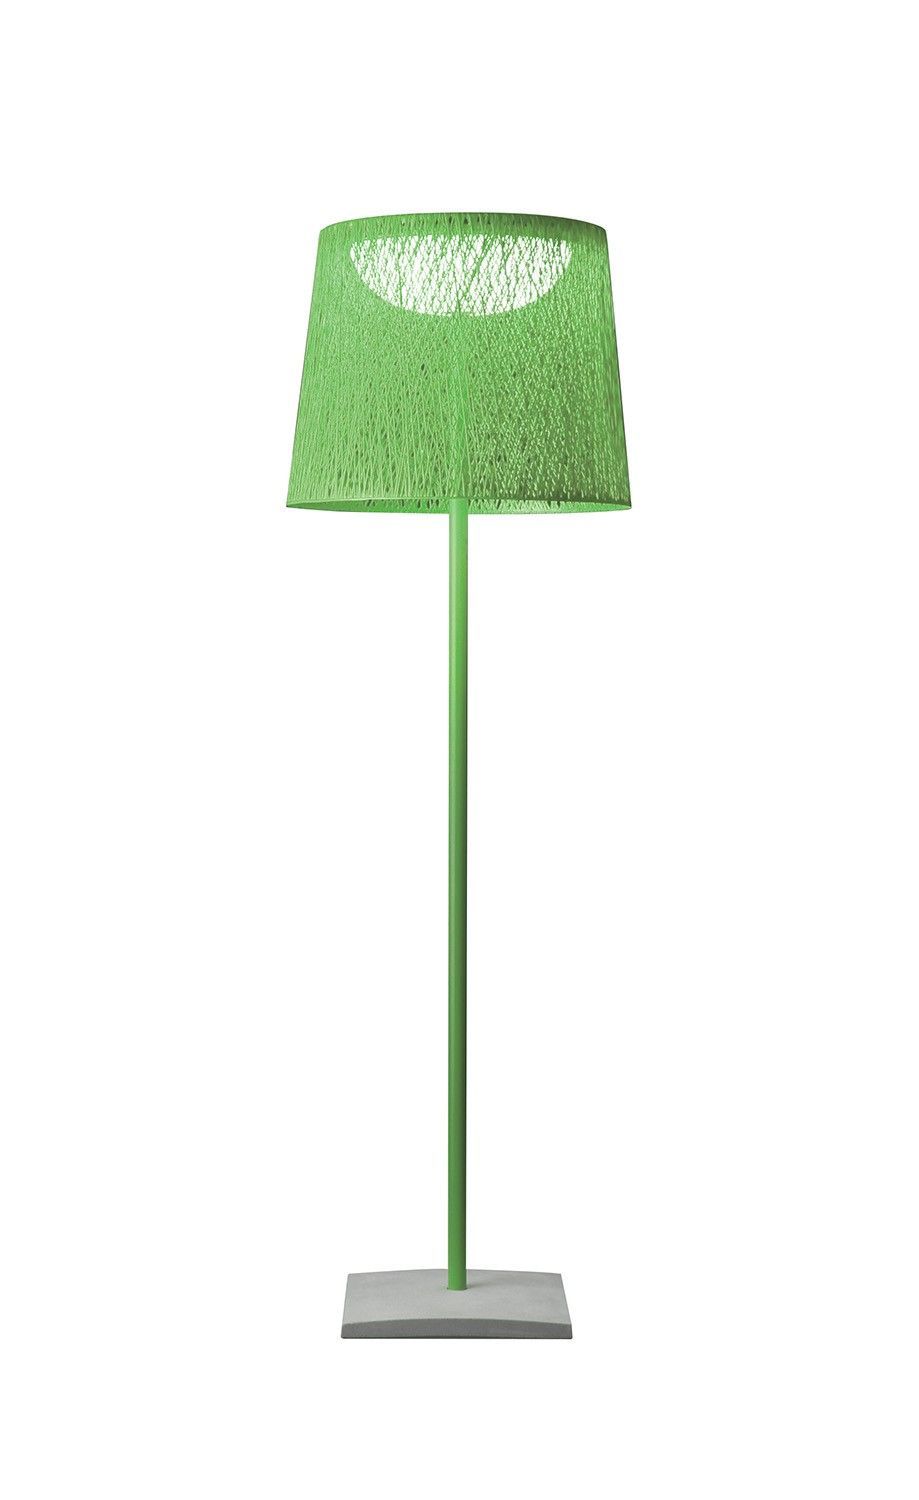 Ground lamp Wind by Vibia